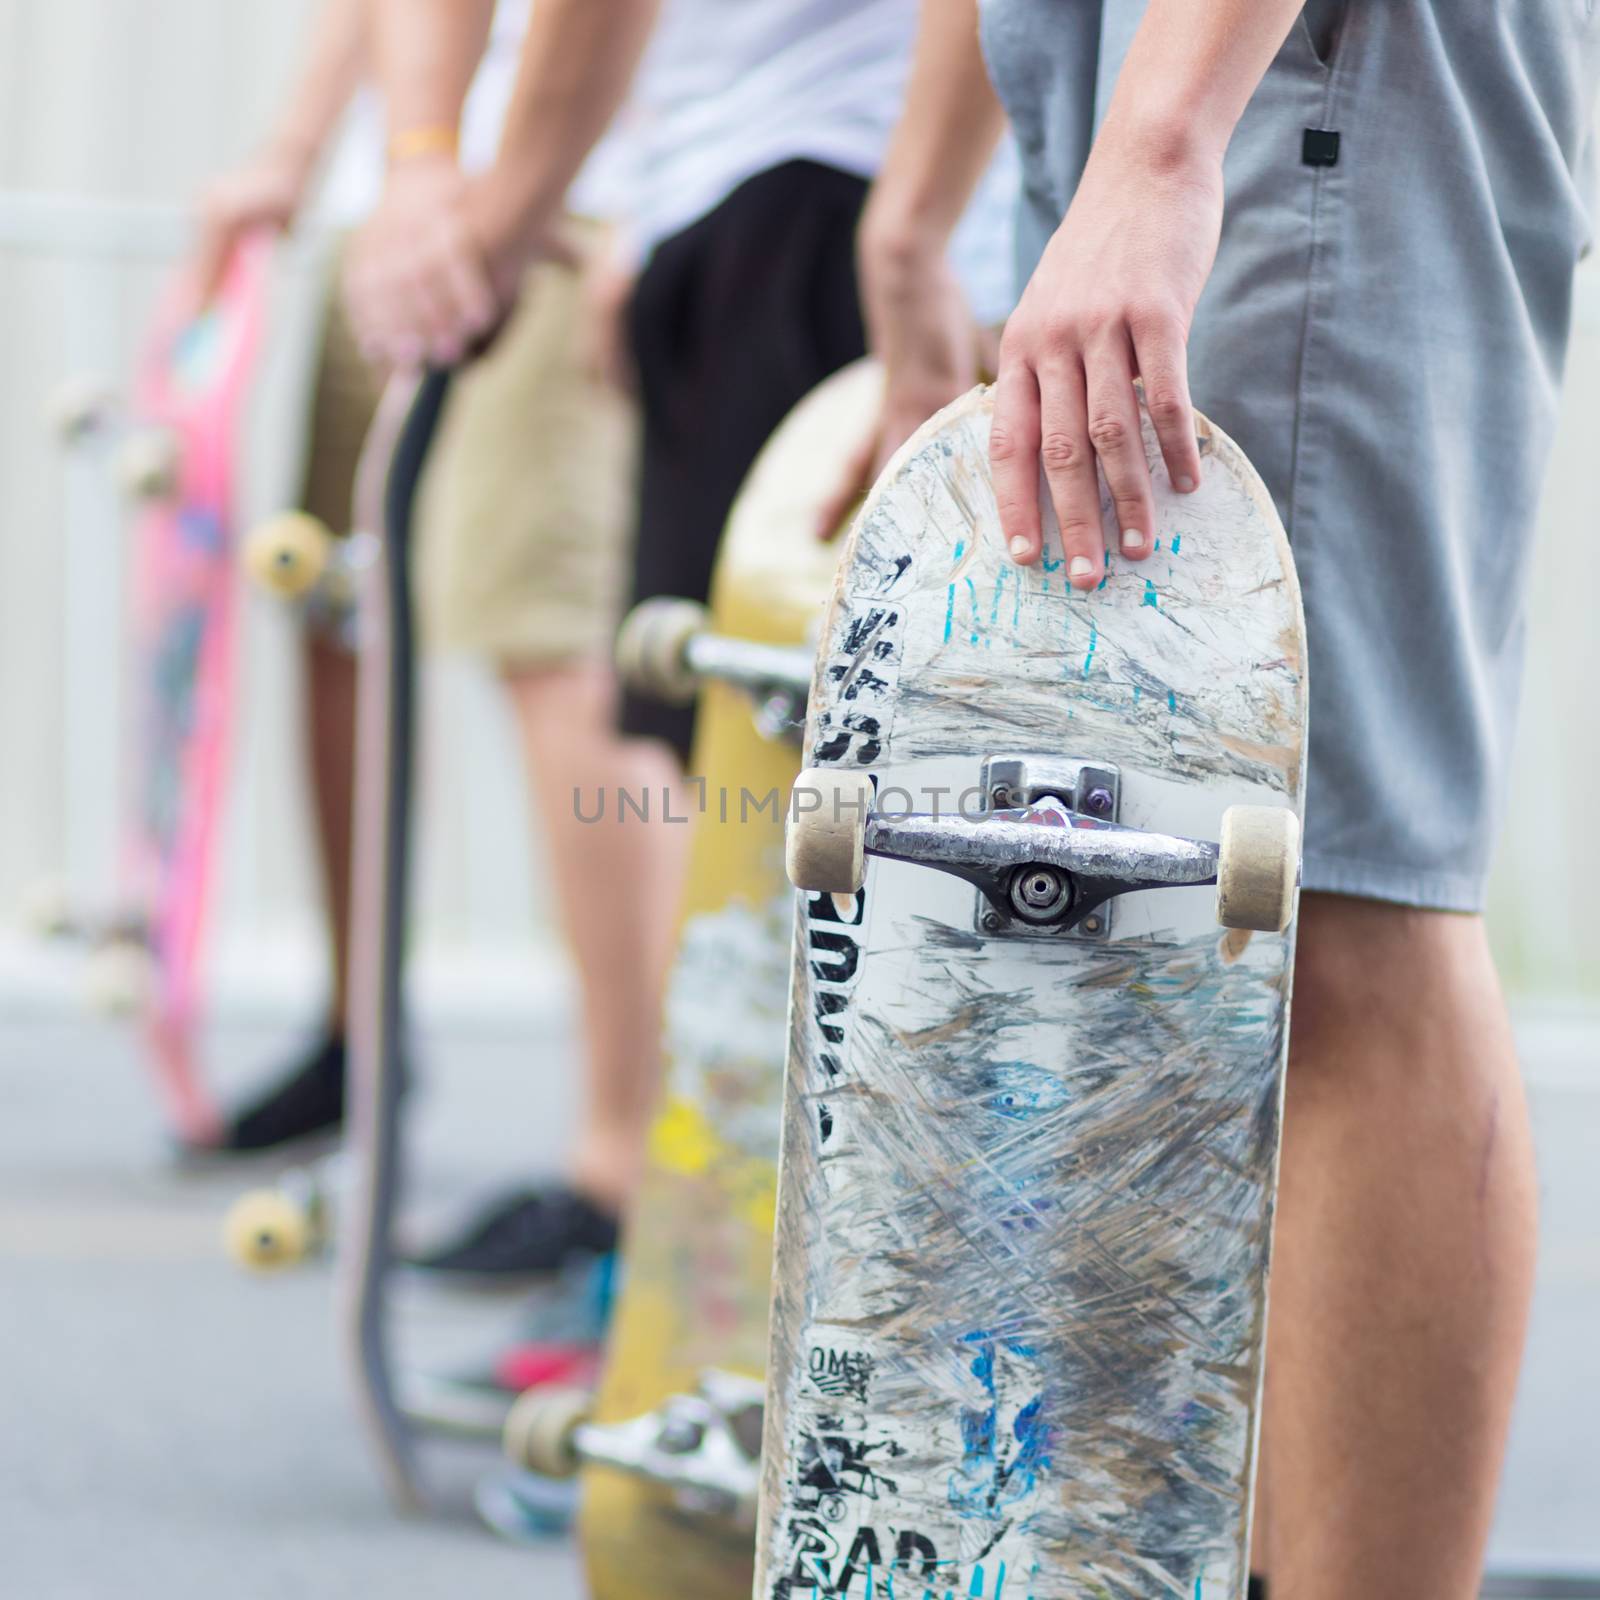 Young skateboarders skateboarding on the street. Group of friends standing in a row with skateboards in their hands. Urban life. Youth subculture.